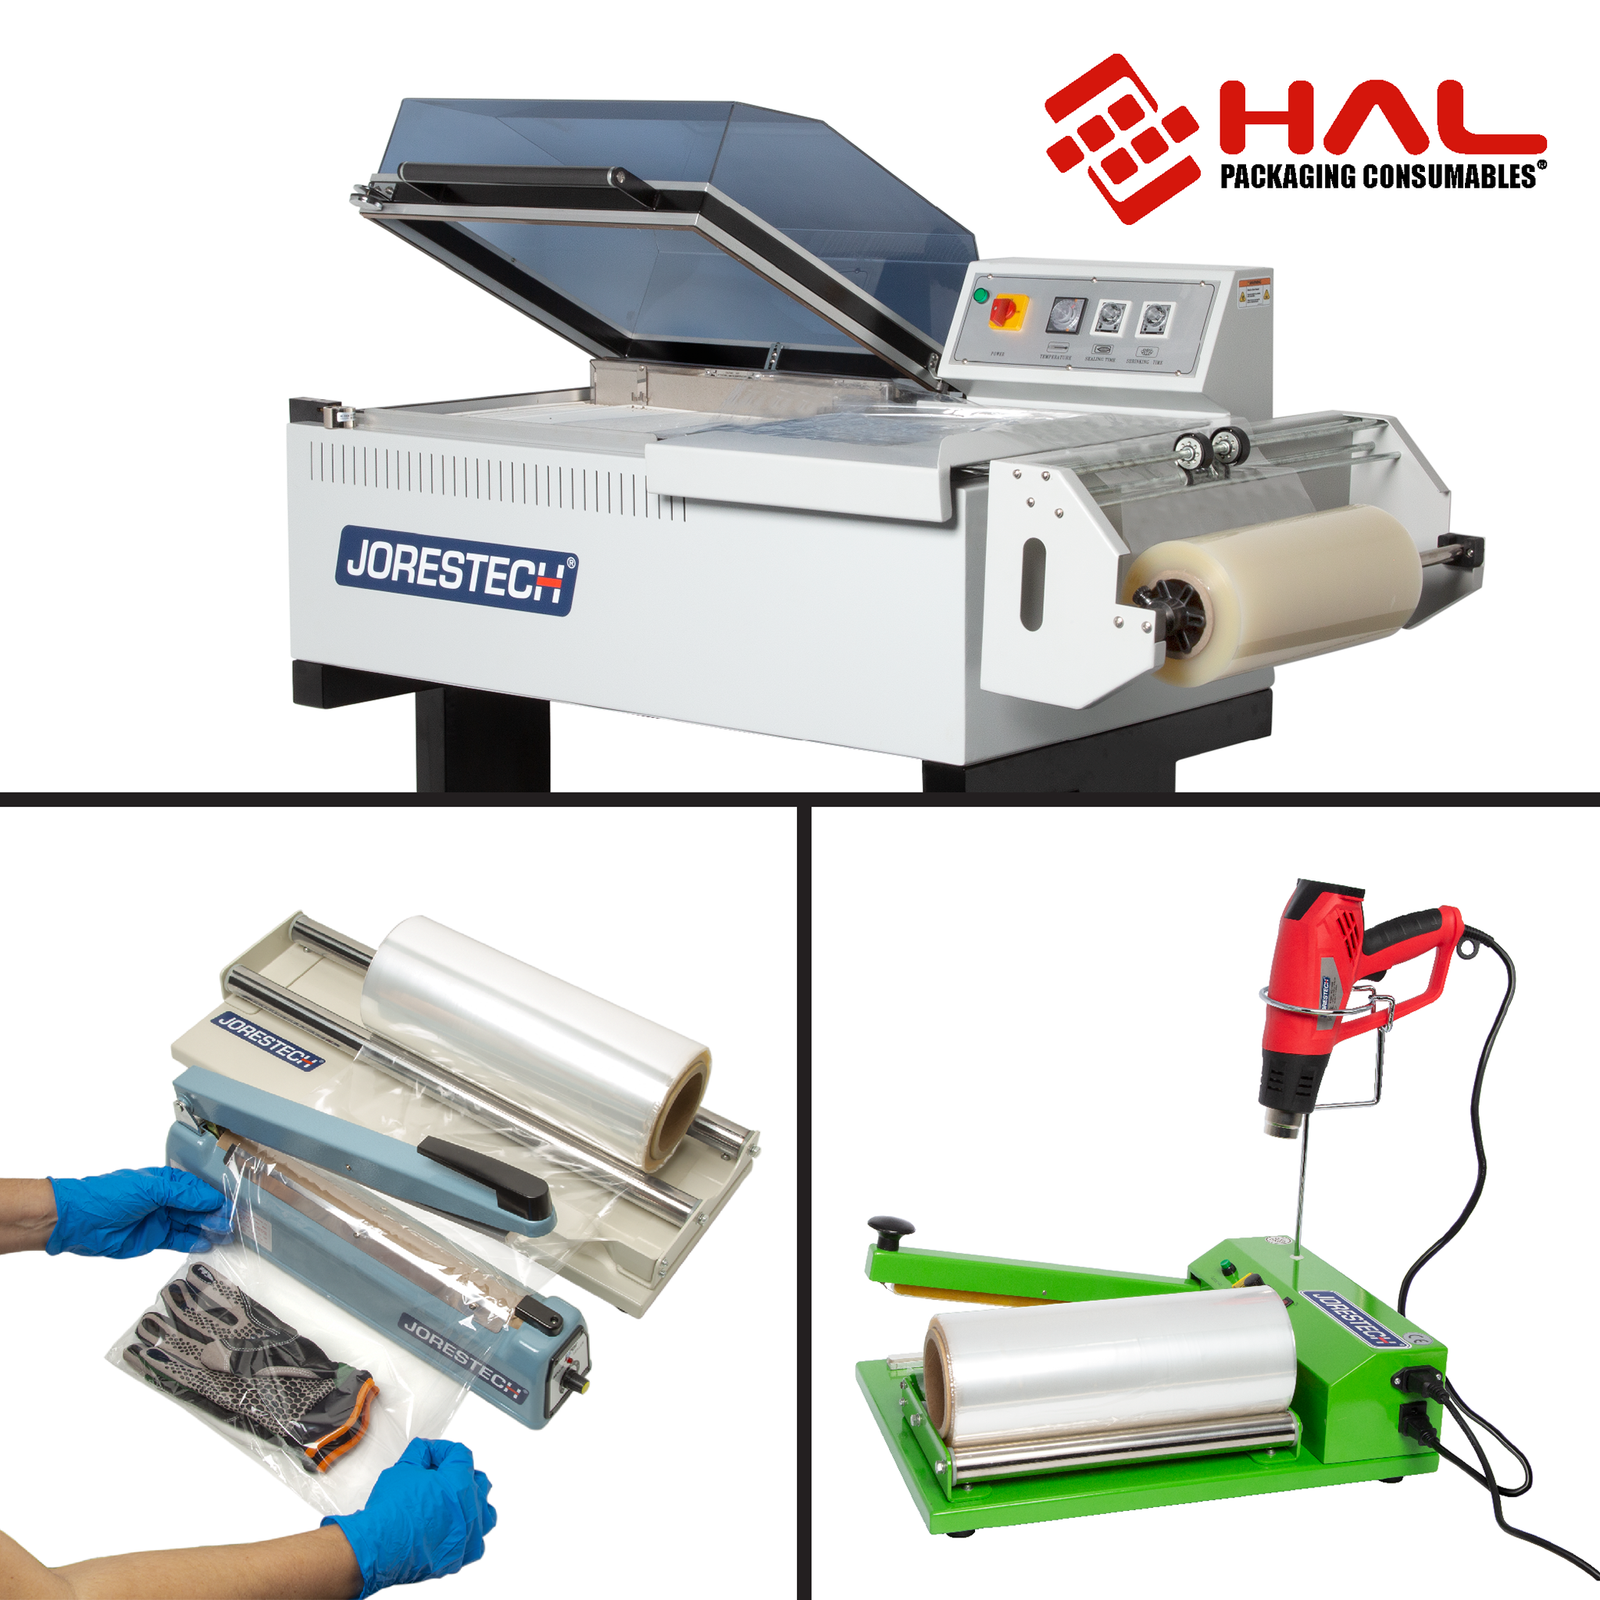 Shrink Packaging roll displayed on several different machines for different applications. 3 sections show: The shrink roll placed on a chamber-type shrink wrapper. Shrink roll used on a shrink film dispenser with a manual impulse sealer, and shrink roll placed on a shrink packaging station with an incorporated bag sealer and a heat gun for shrink wrapping